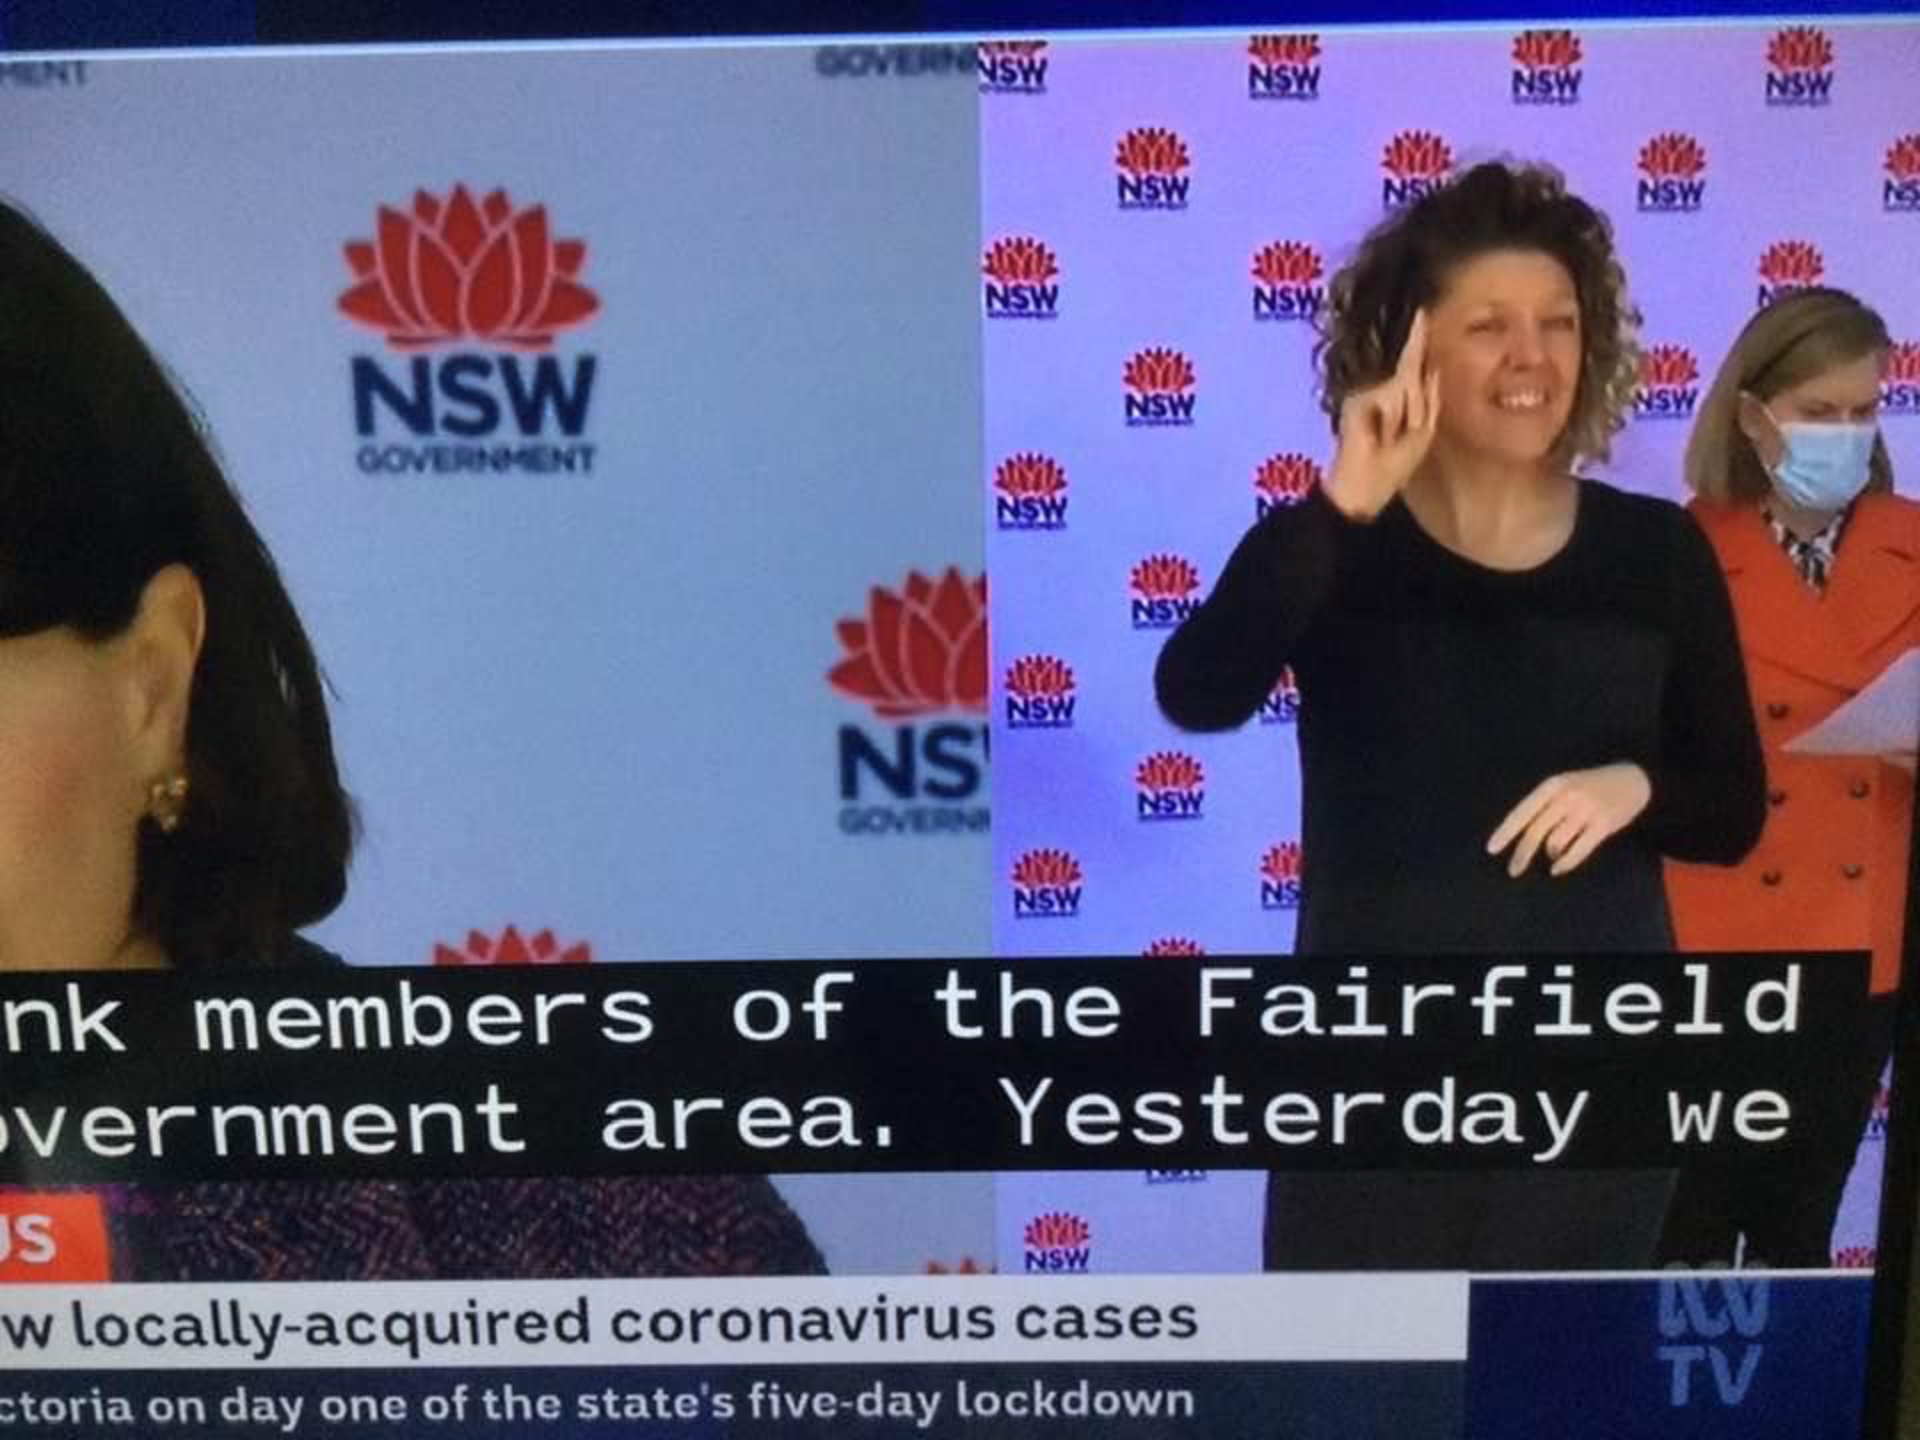 Photo shows, for the first time Deaf Community Auslan users accessing State and Federal Pandemic messages 2020 -2021. The Deaf Community lobbied for this access and was successful in understanding emergency addresses via Auslan interpreters beside the Premier's Address around the Nation each morning at 11.00 am on Free TV .